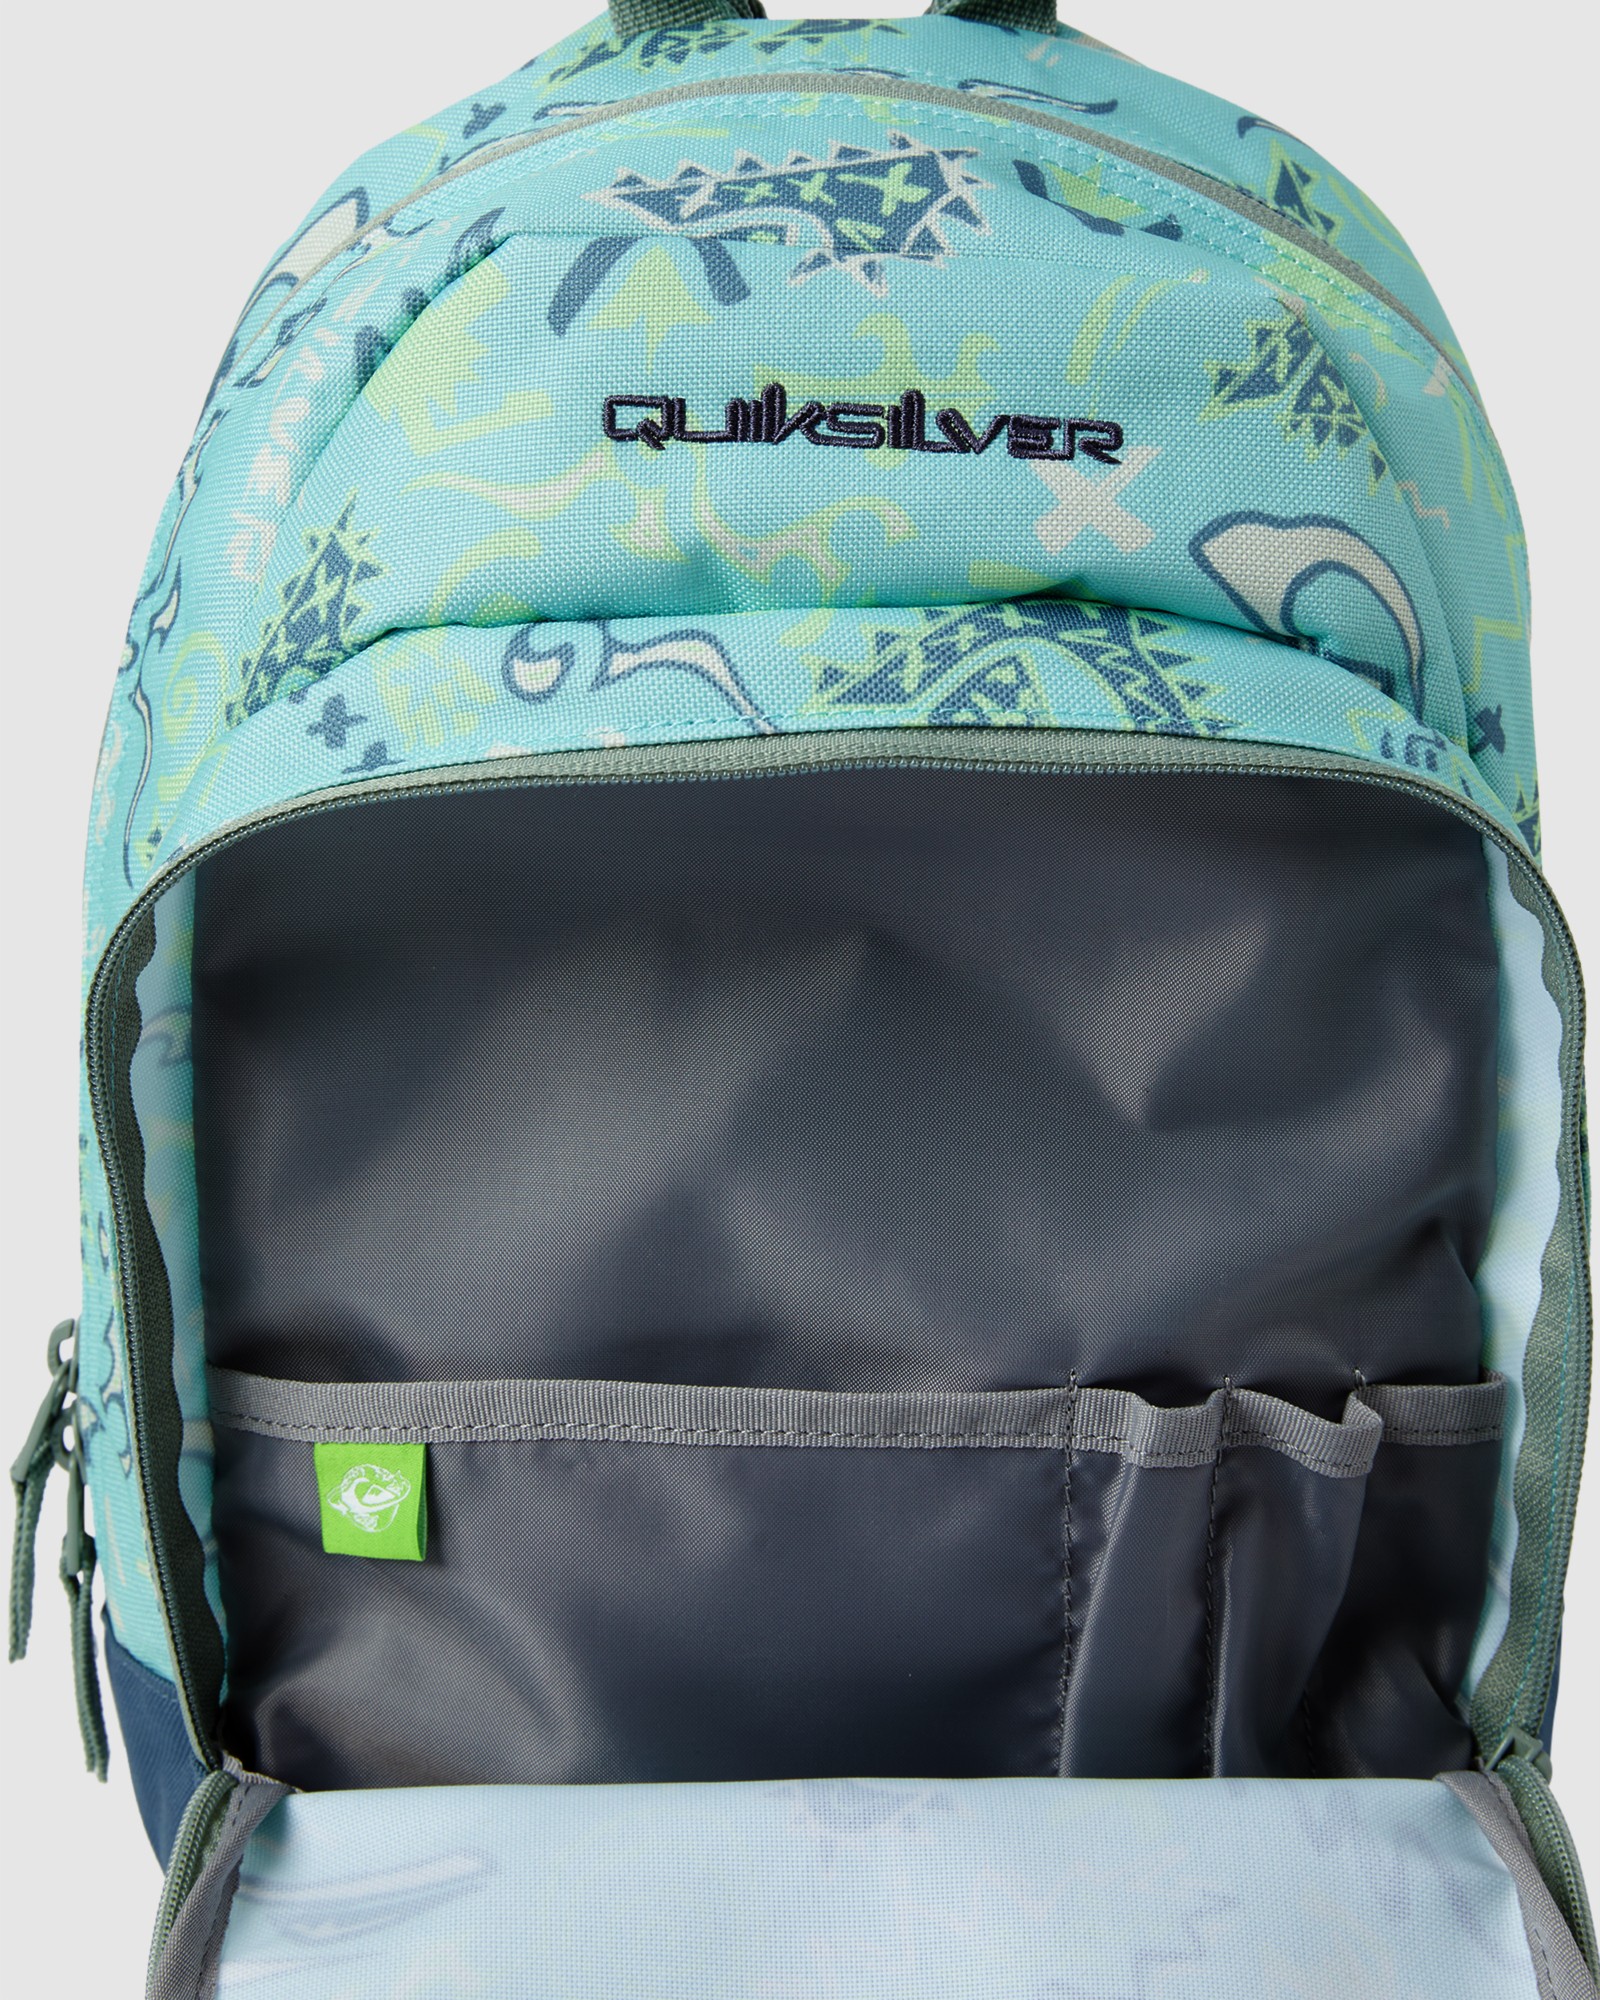 Quiksilver Chomping 12L Small Backpack - Pastel Turquoise | SurfStitch